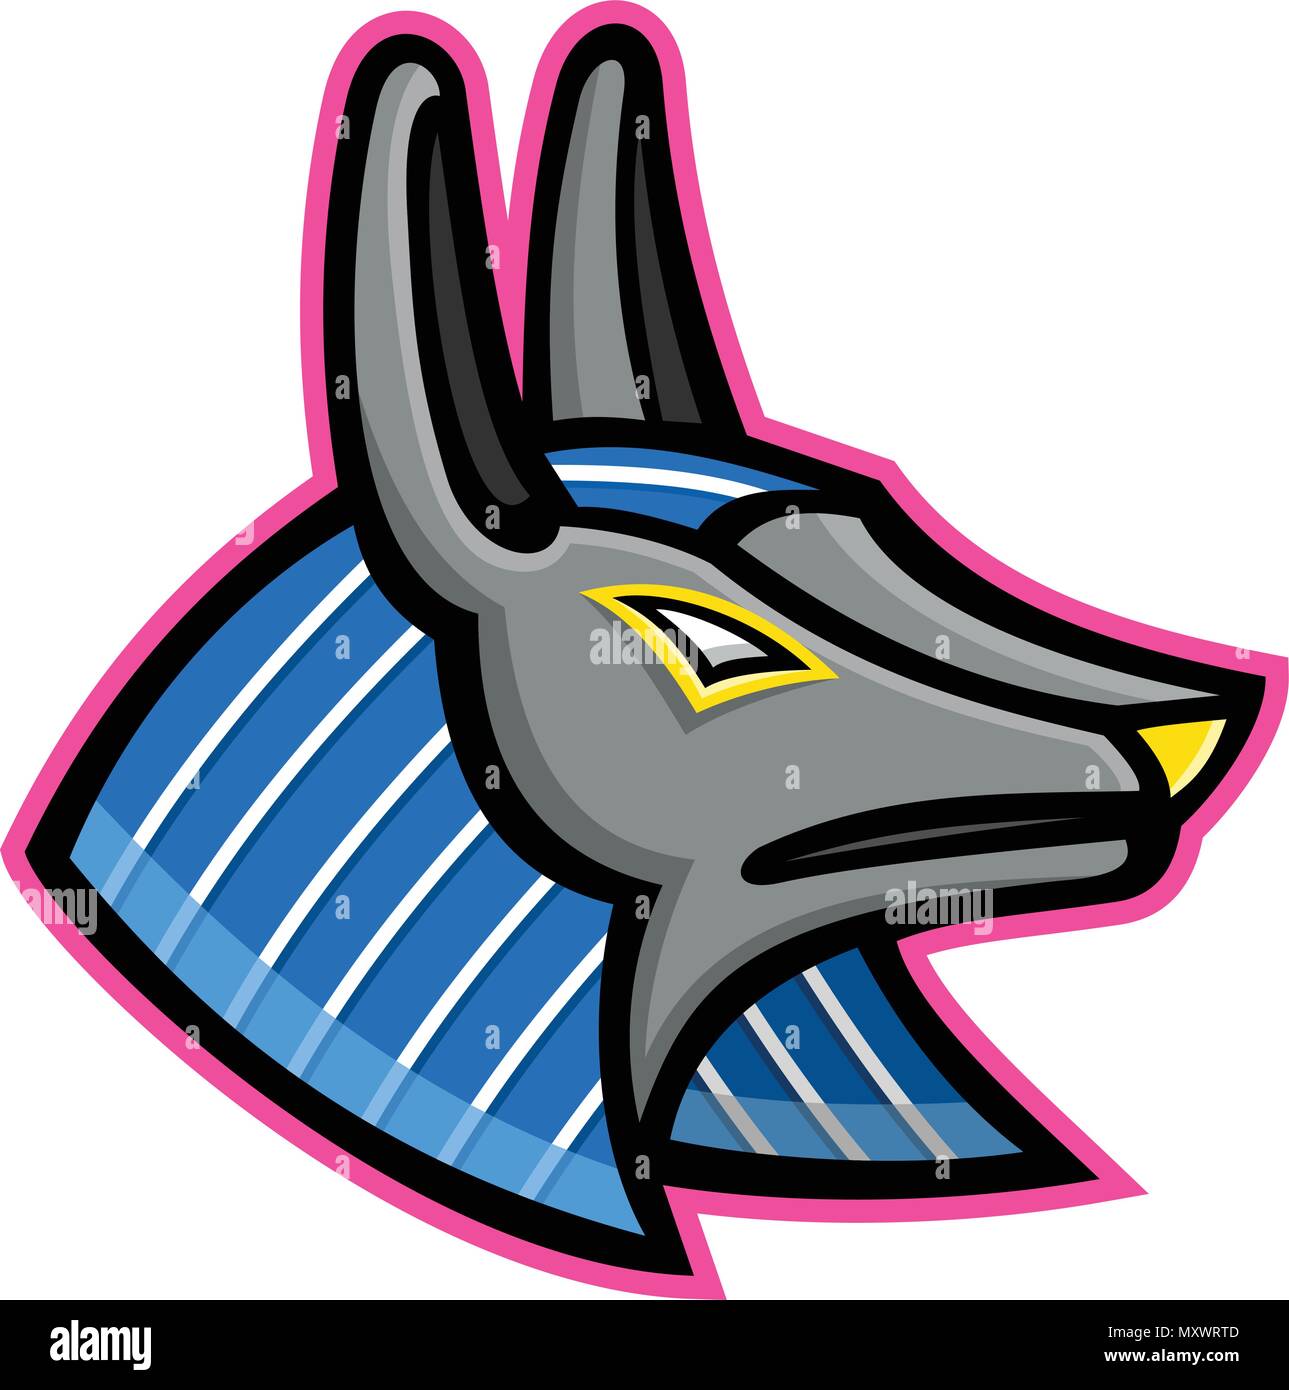 Mascot icon illustration of head of Anubis, an ancient Egyptian animal god of afterlife depicted as a man with a canine head of dog or jackal viewed f Stock Vector